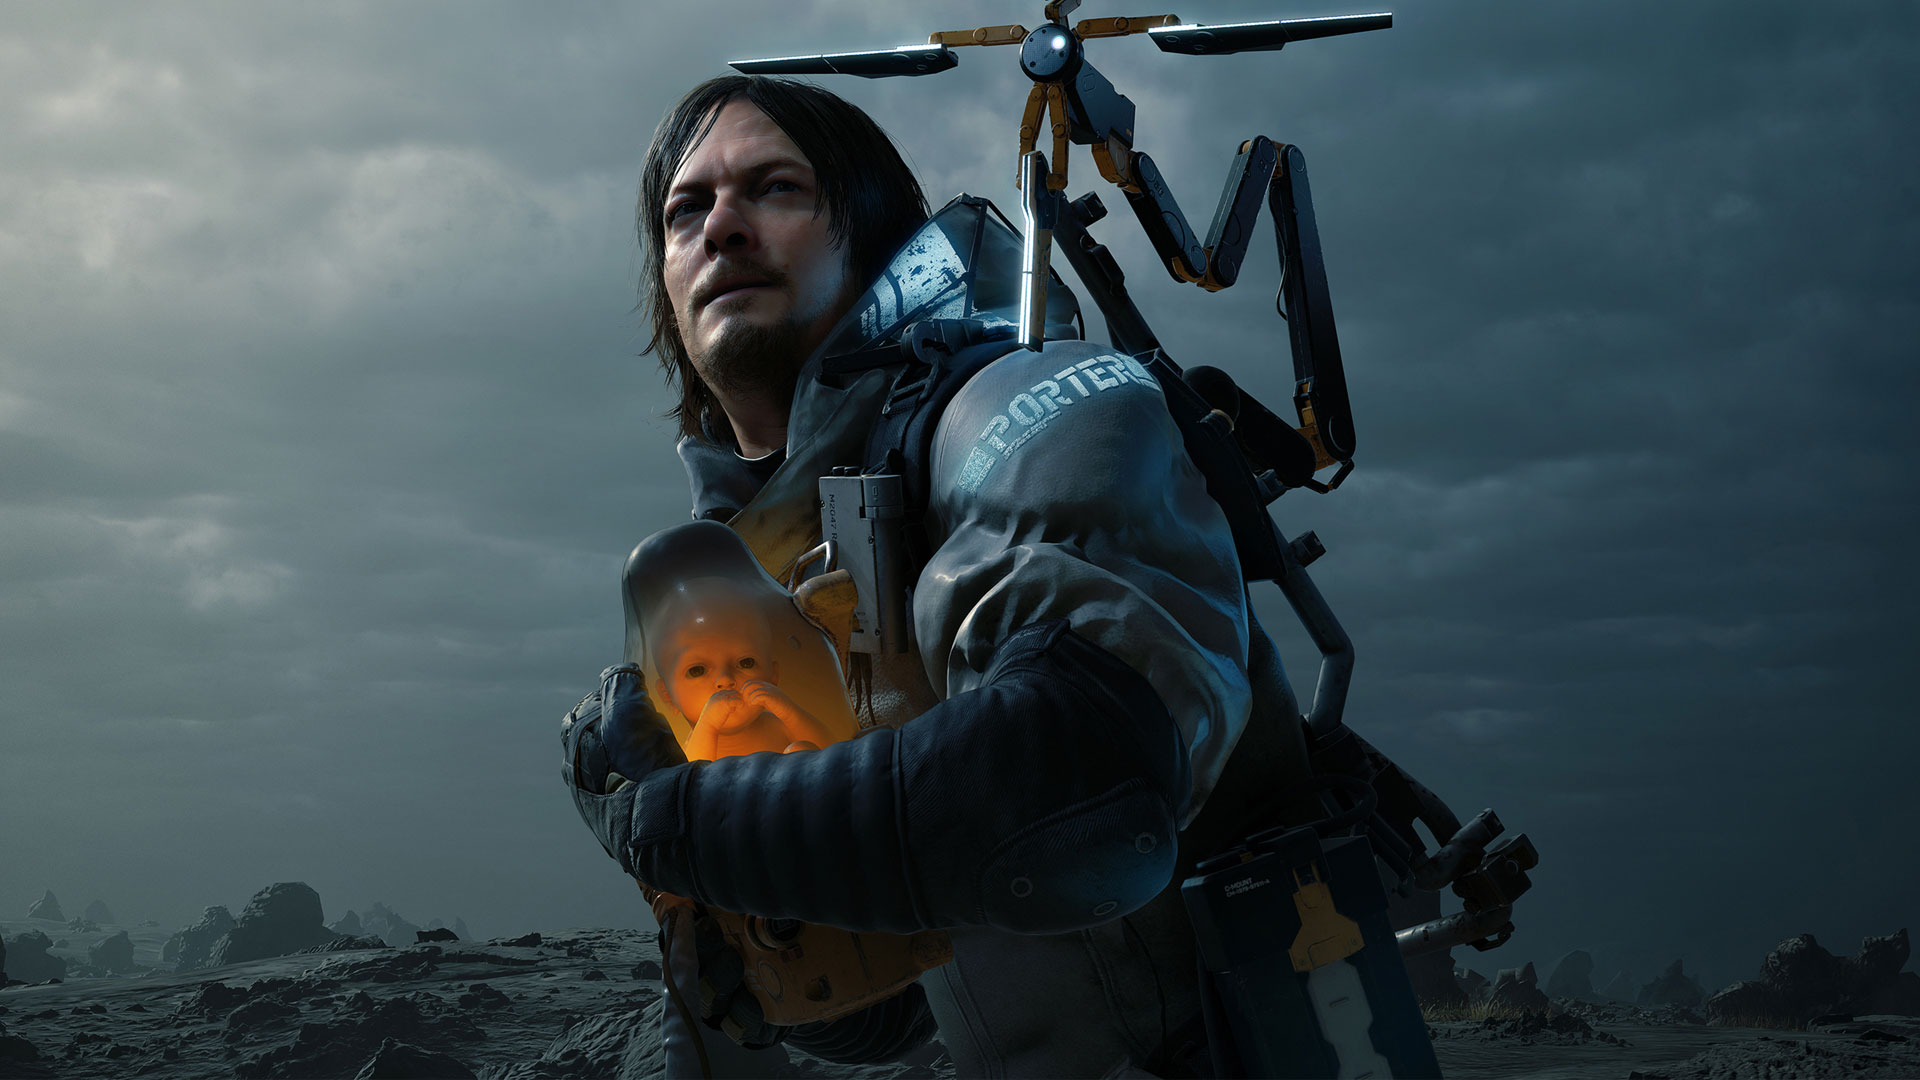 Kojima Productions We'll Probably Announce Next Game Quite Soon